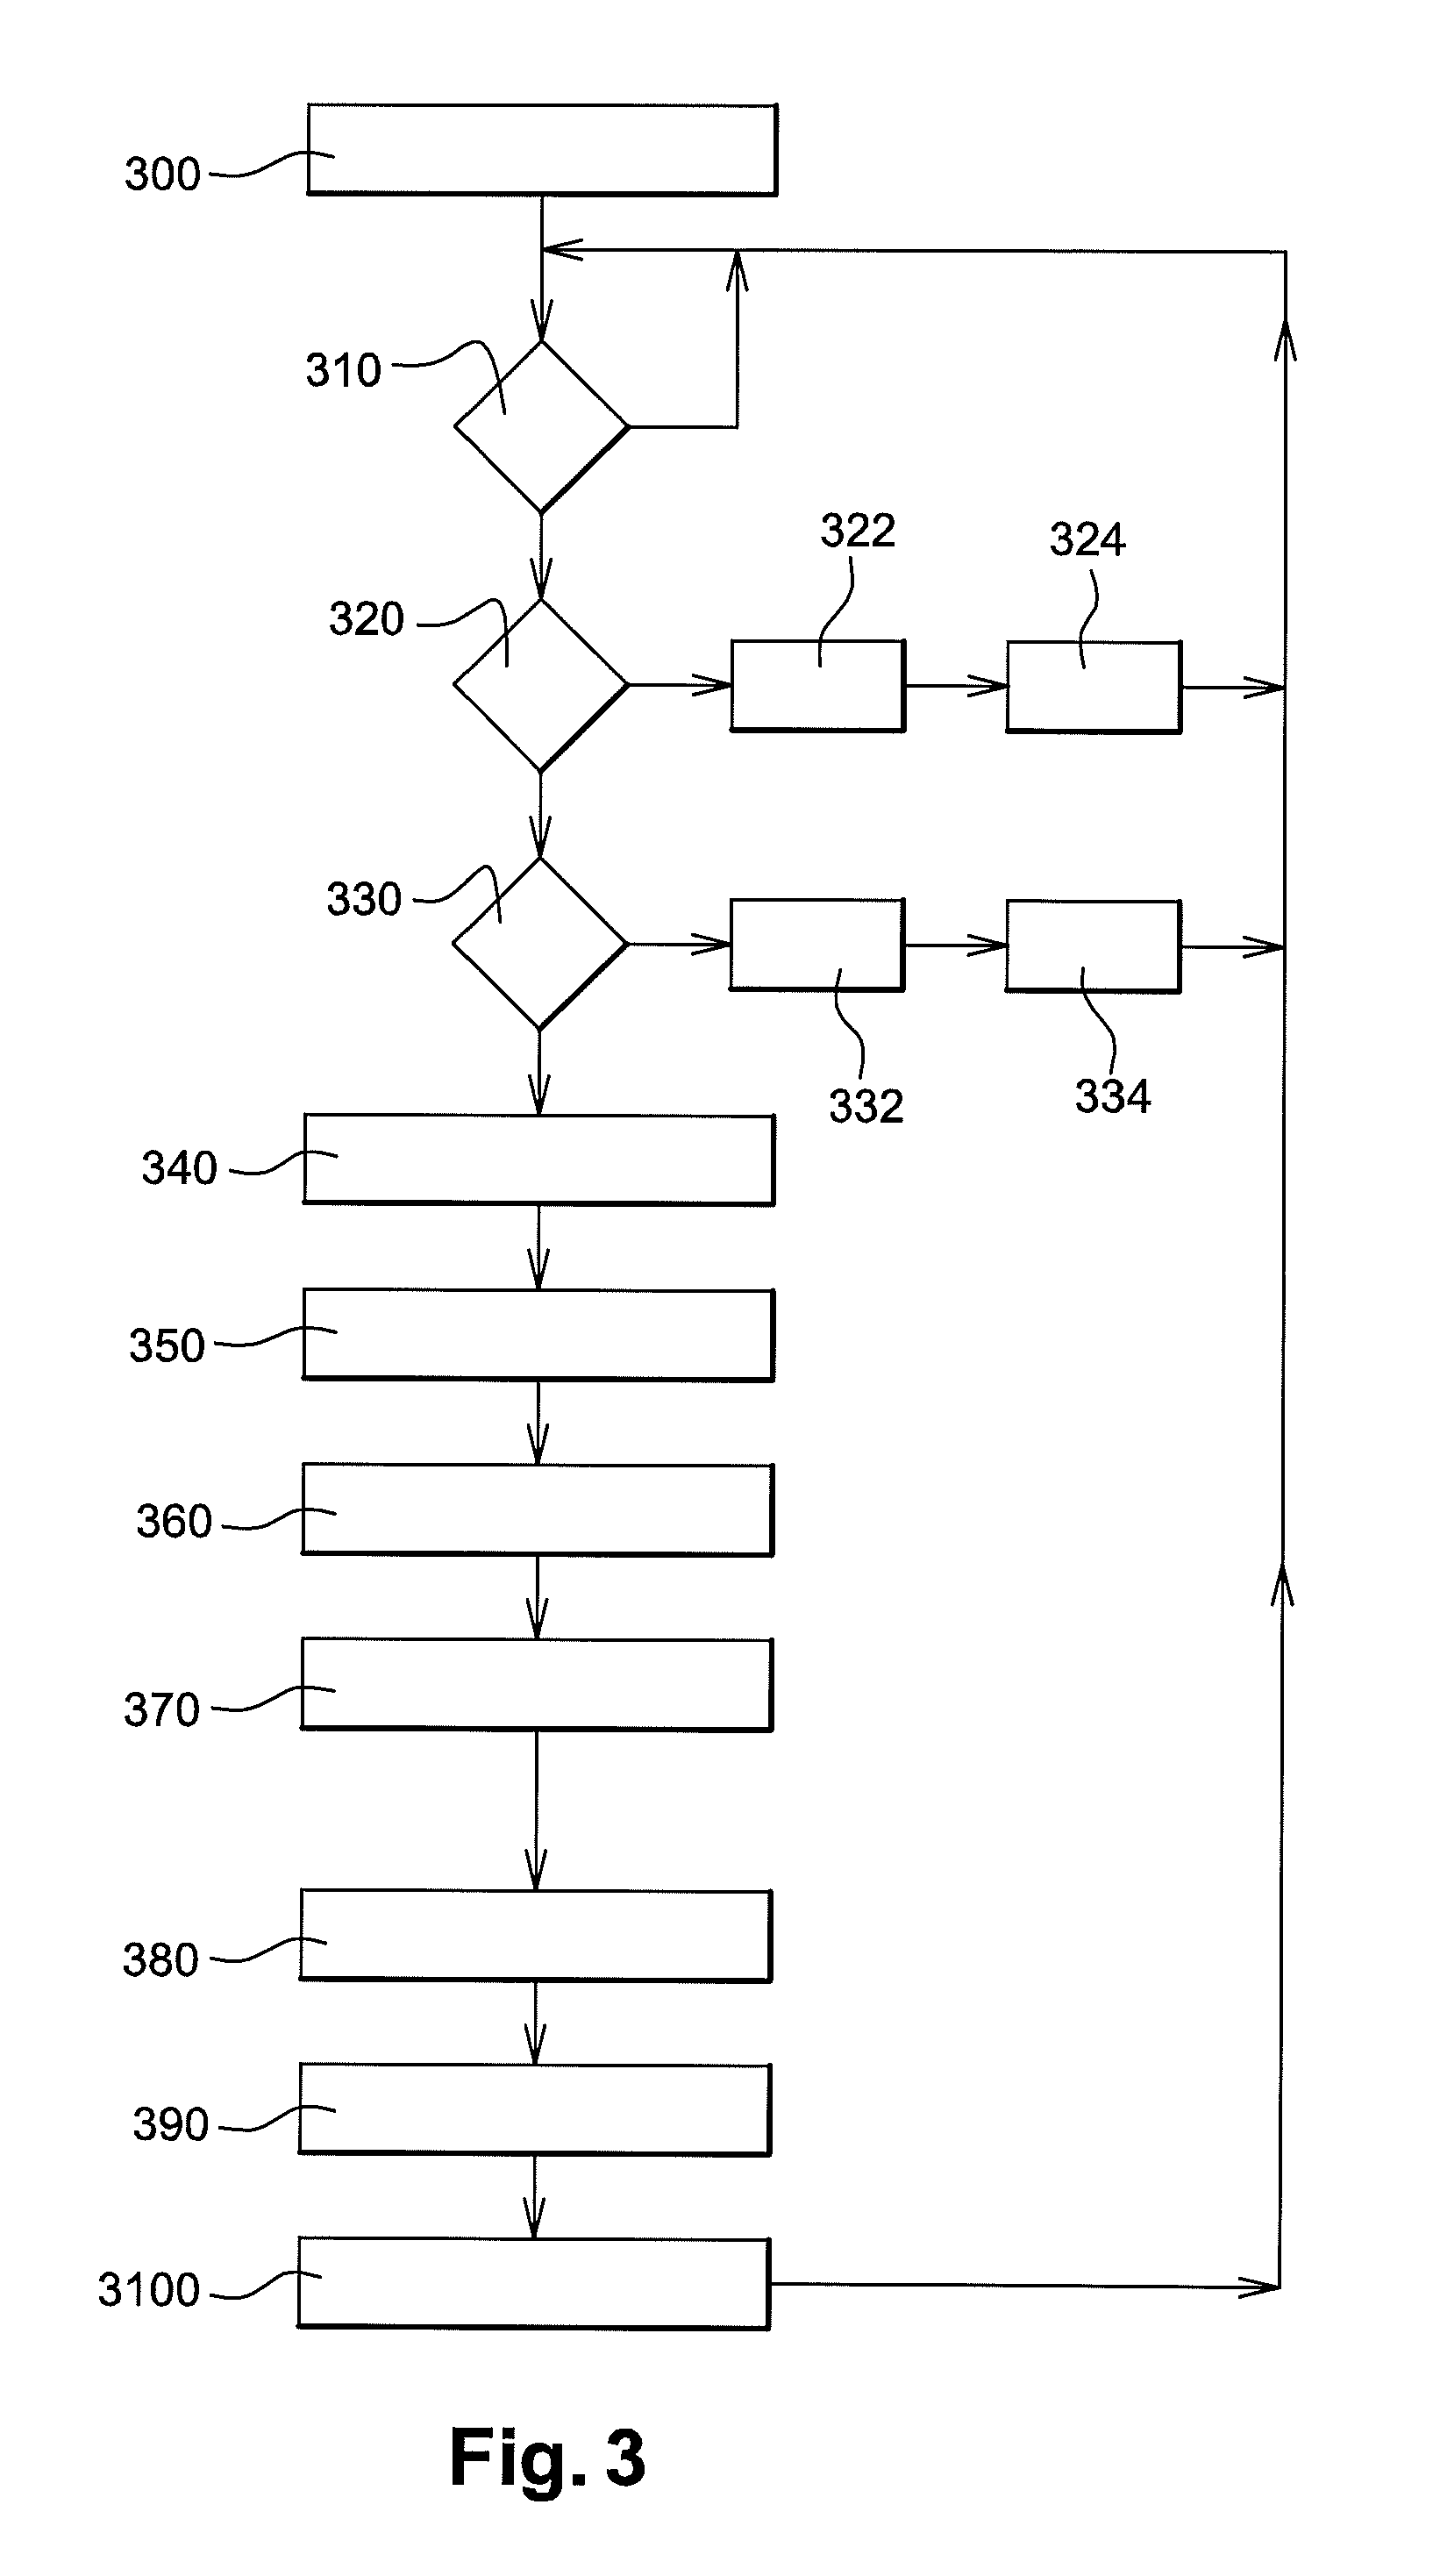 Method for executing a program relating to several services, and the corresponding electronic system and device